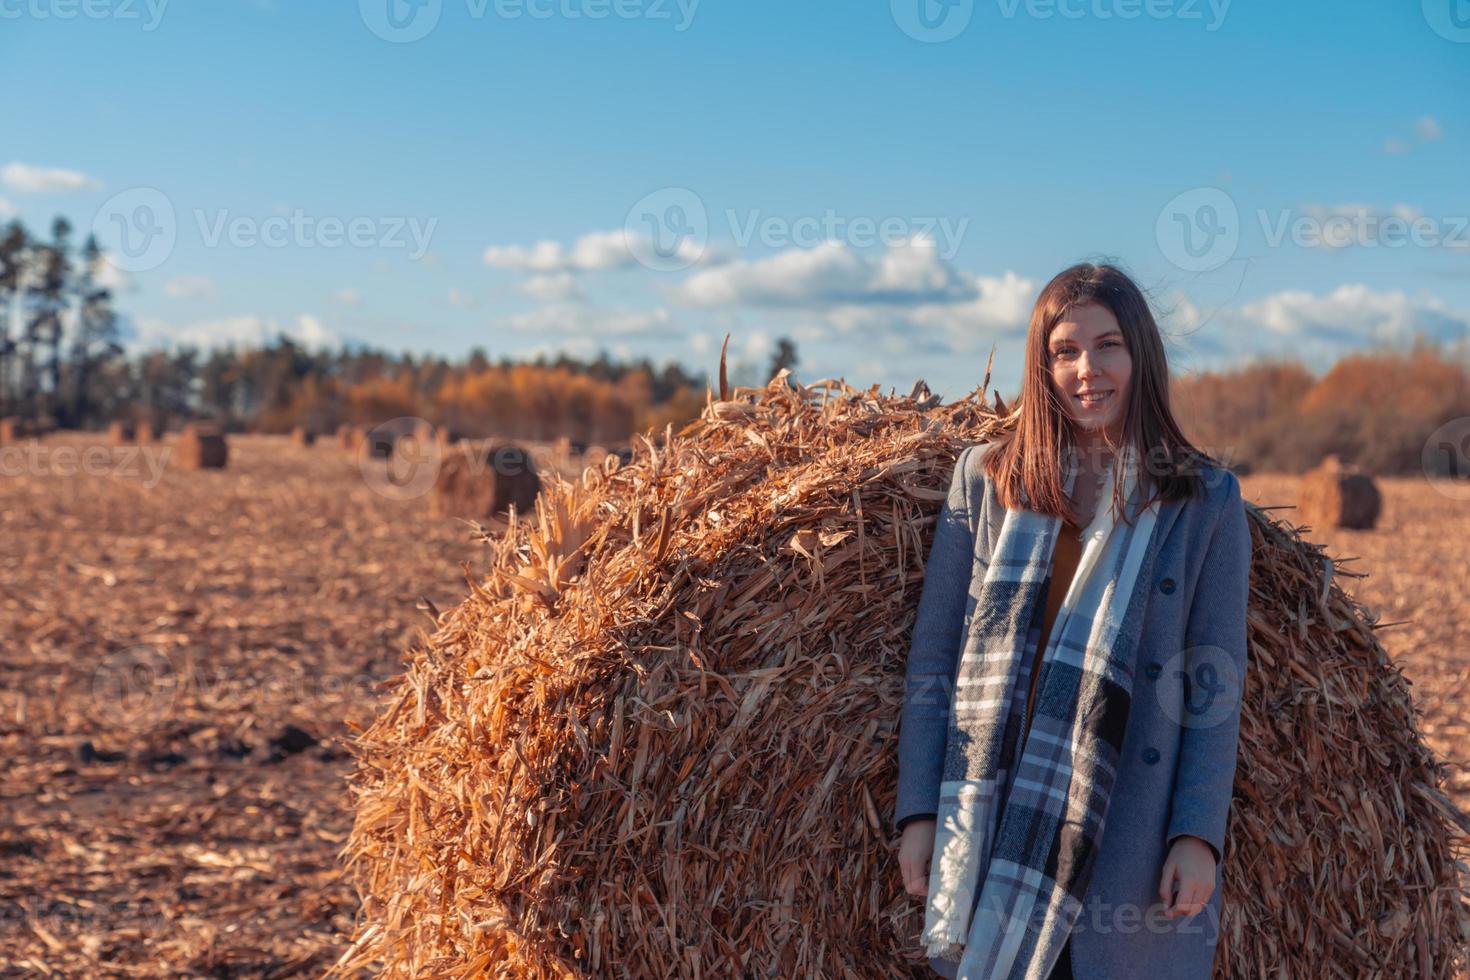 A girl of European appearance in a gray coat stands in a field near a larger bale with hay against a blue sky photo